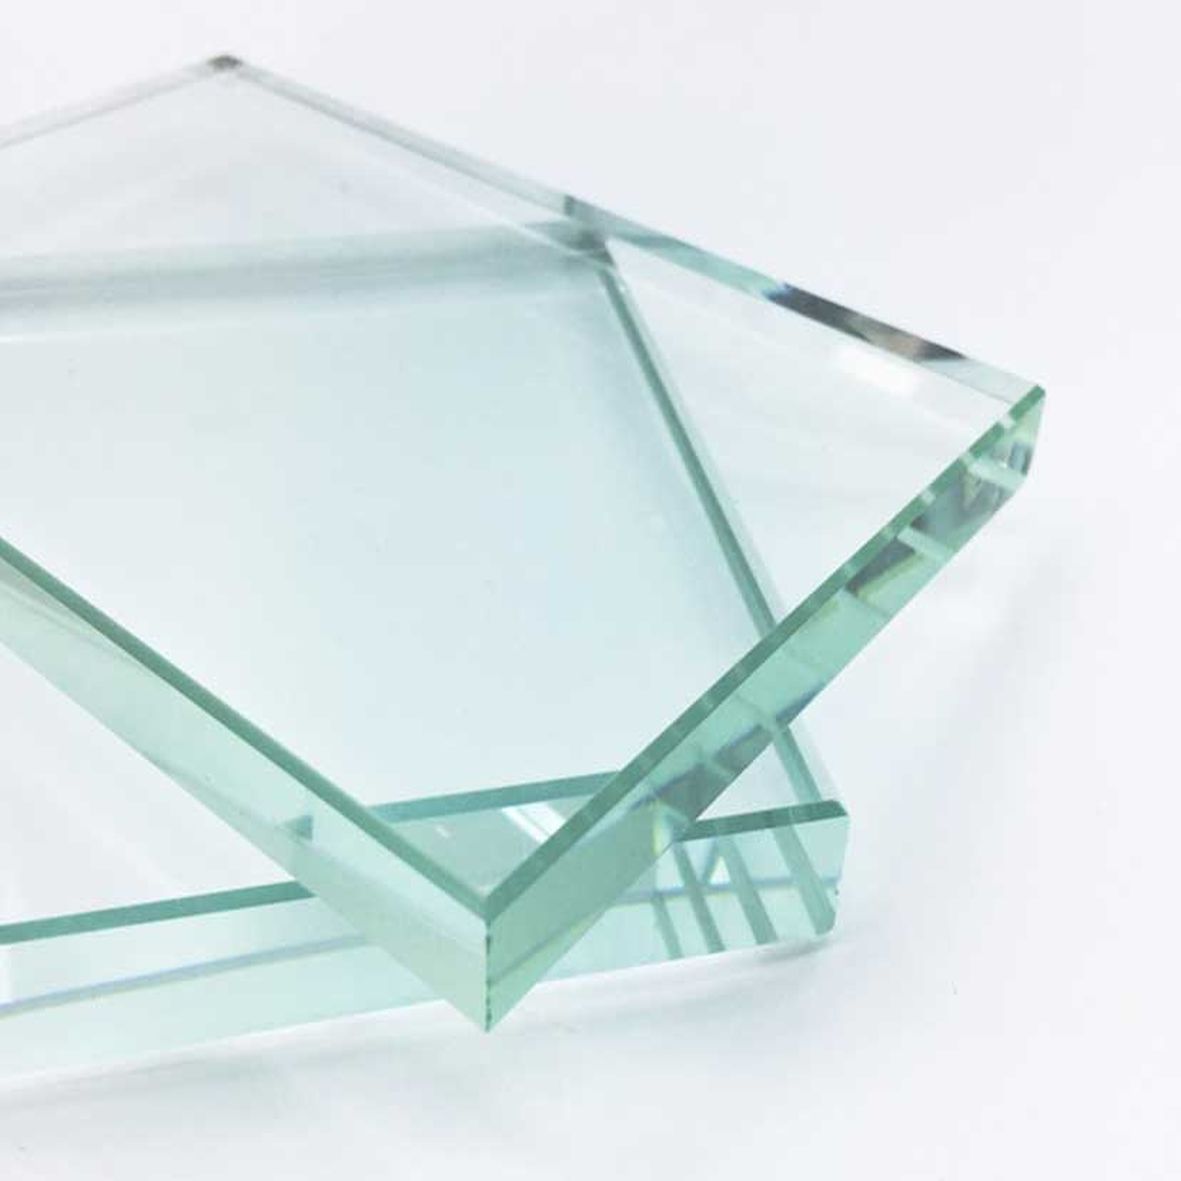 10mm CLEAR Toughened Glass